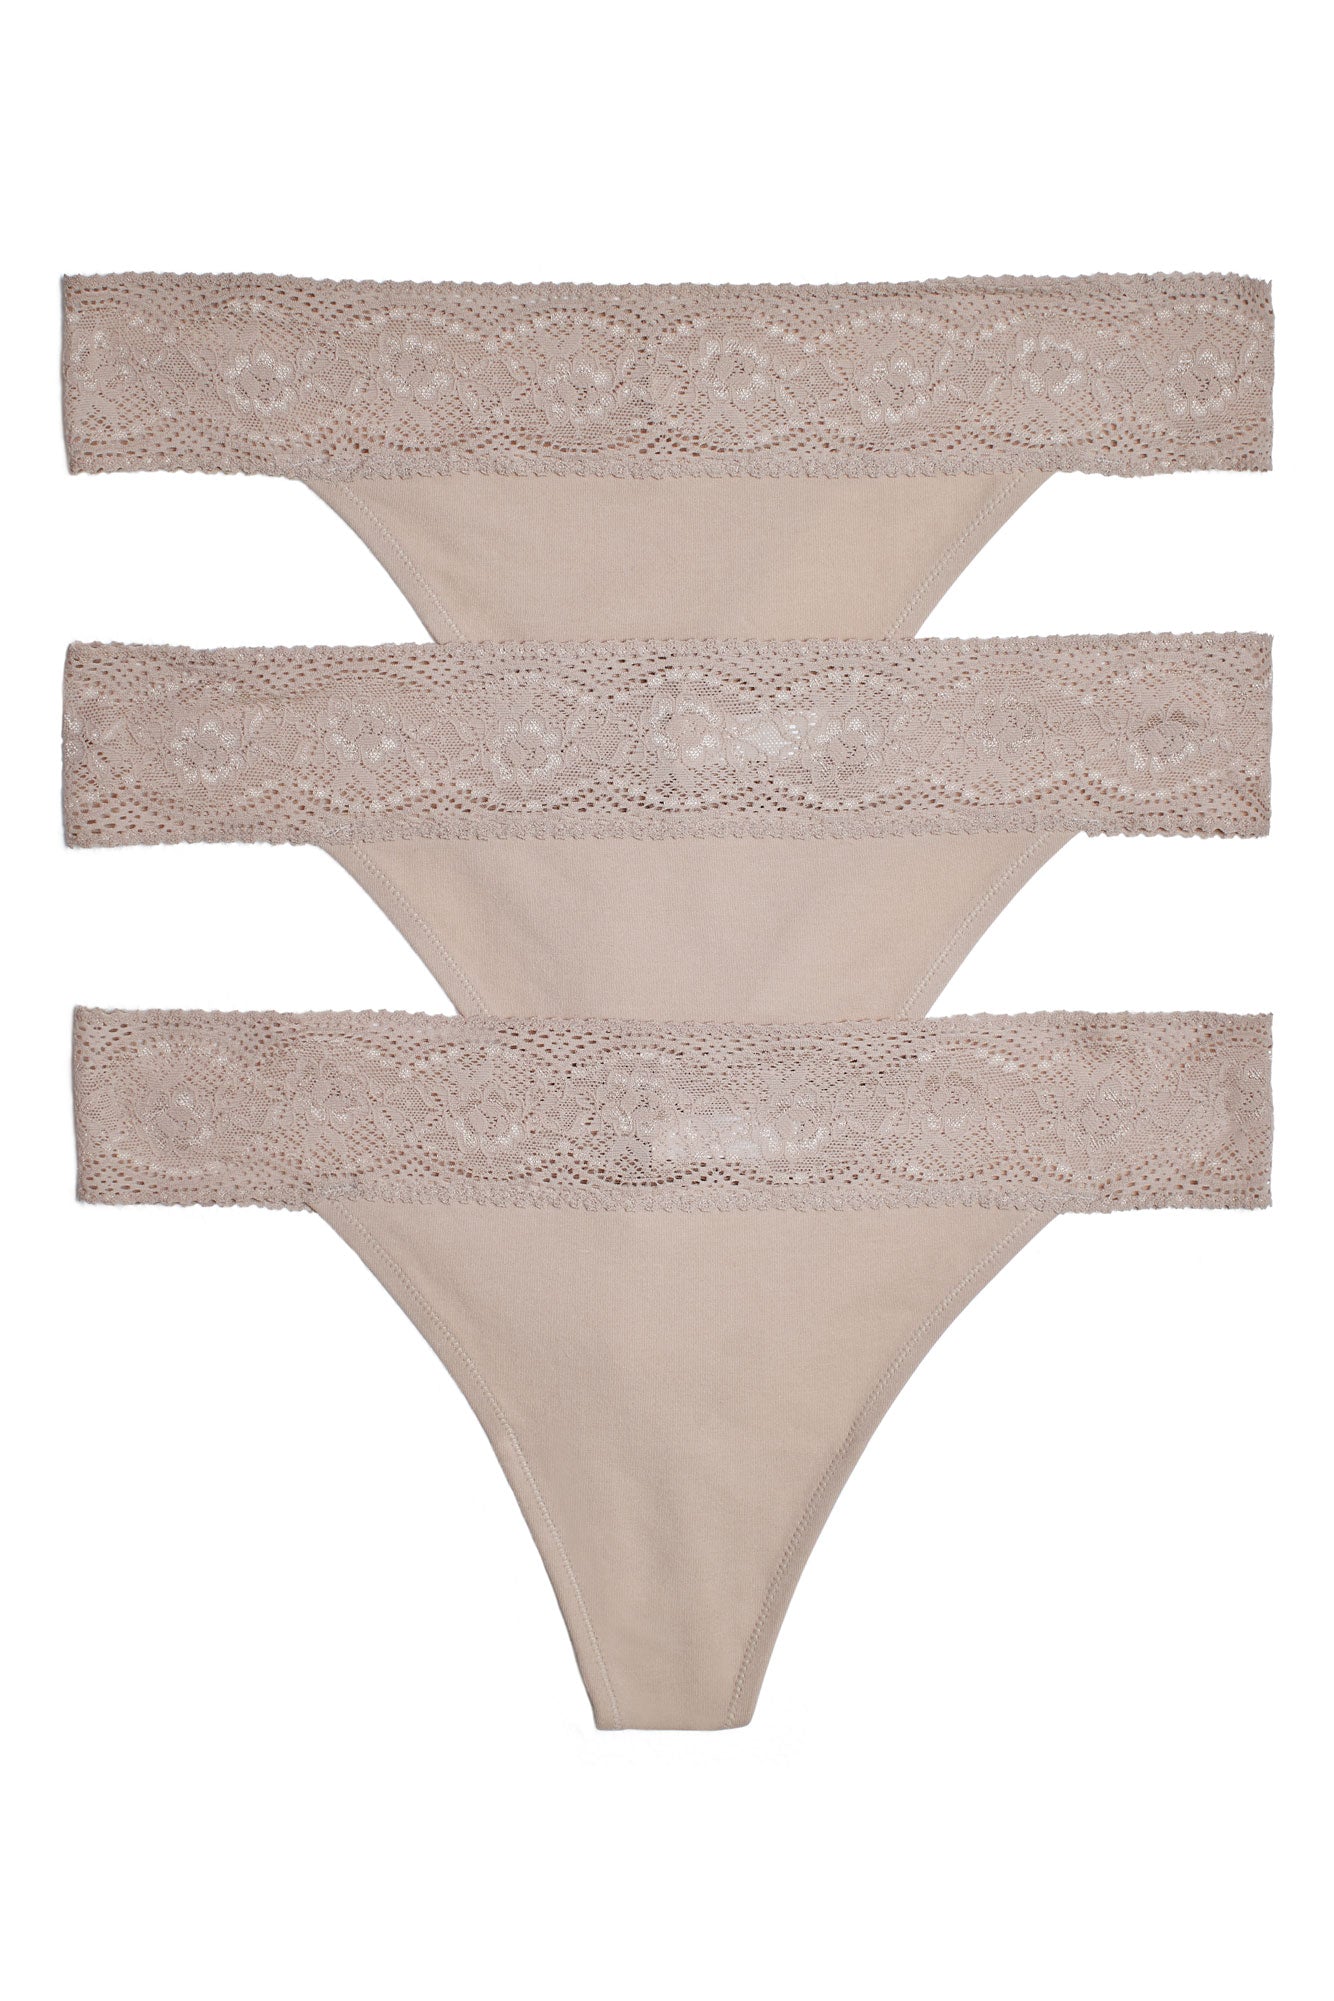 Petal One Size Cotton Thong 3-Pack in Cashmere/Cashmere/Cashmere Flat Shot Image